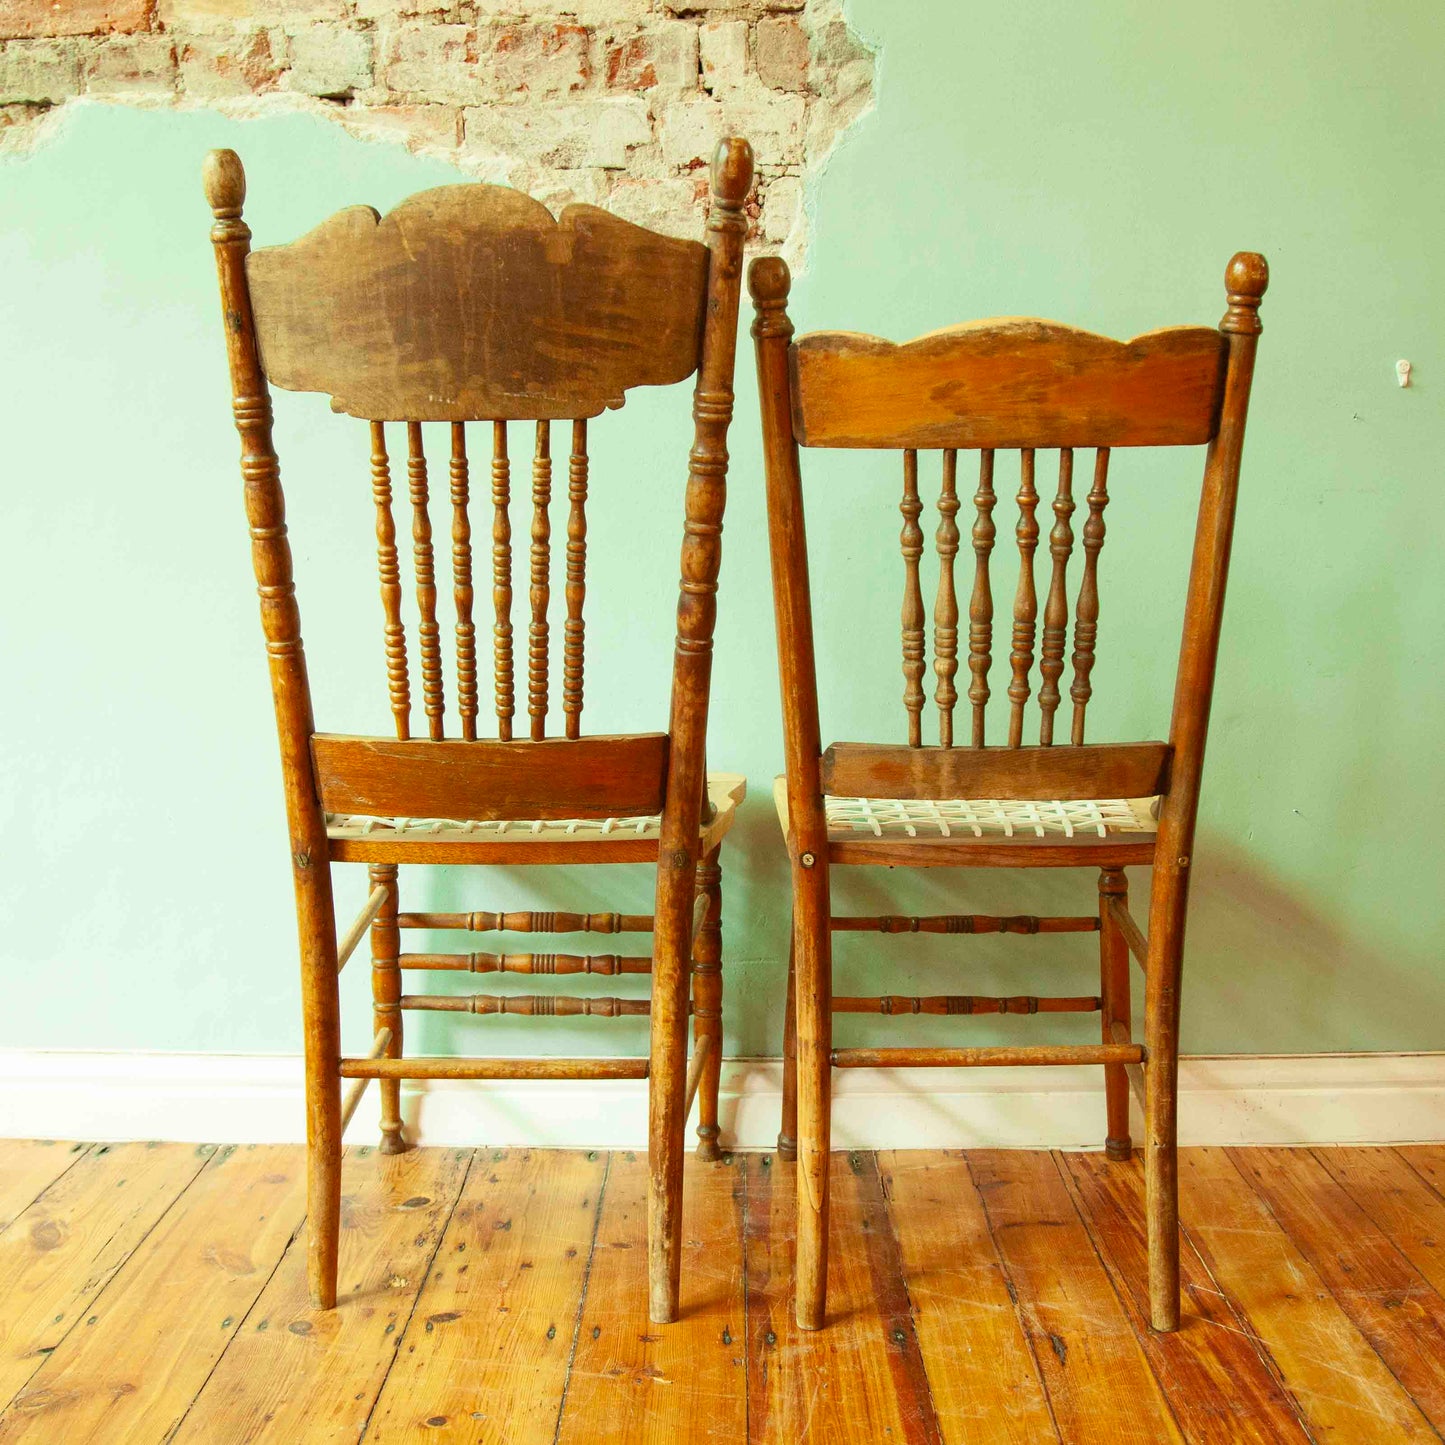 Pressed back chairs